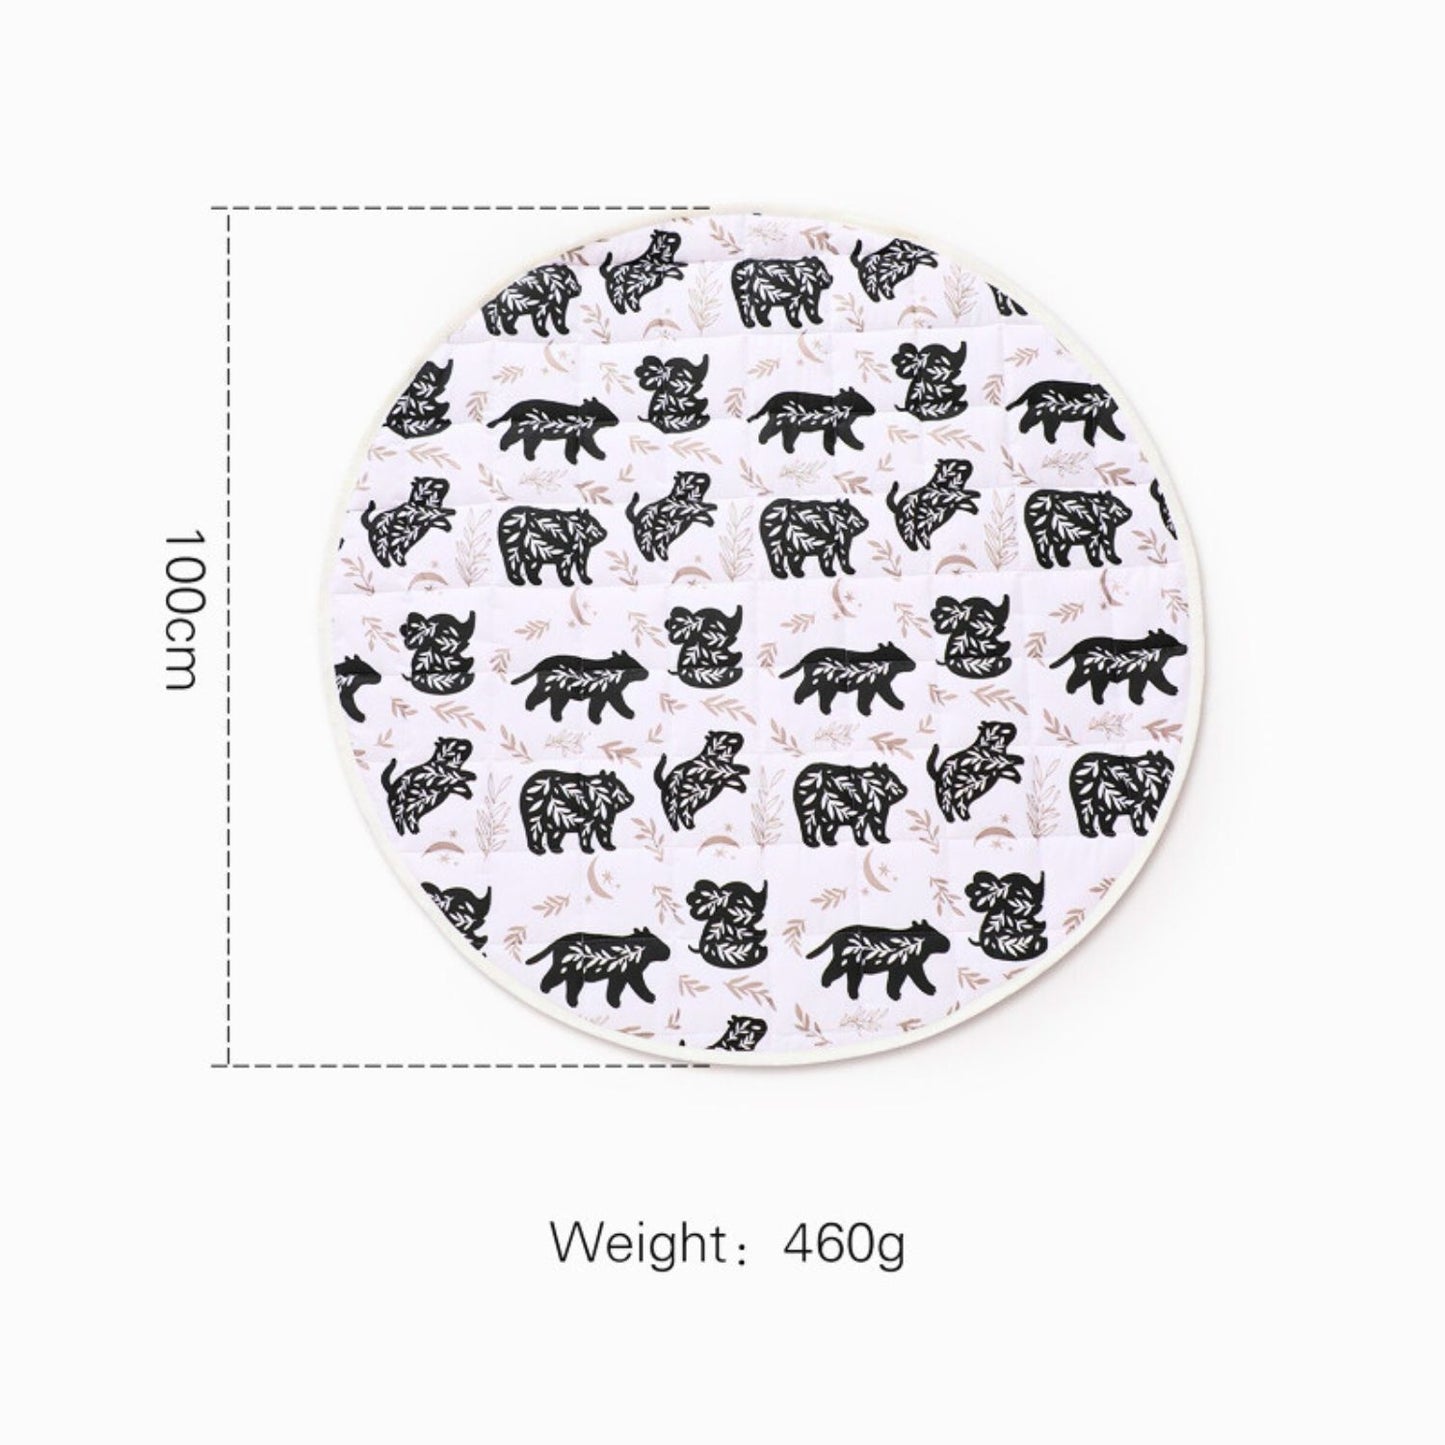 Non-toxic, hypoallergenic, Soft and cushioned baby playmat color black and white bears machine washable measurements